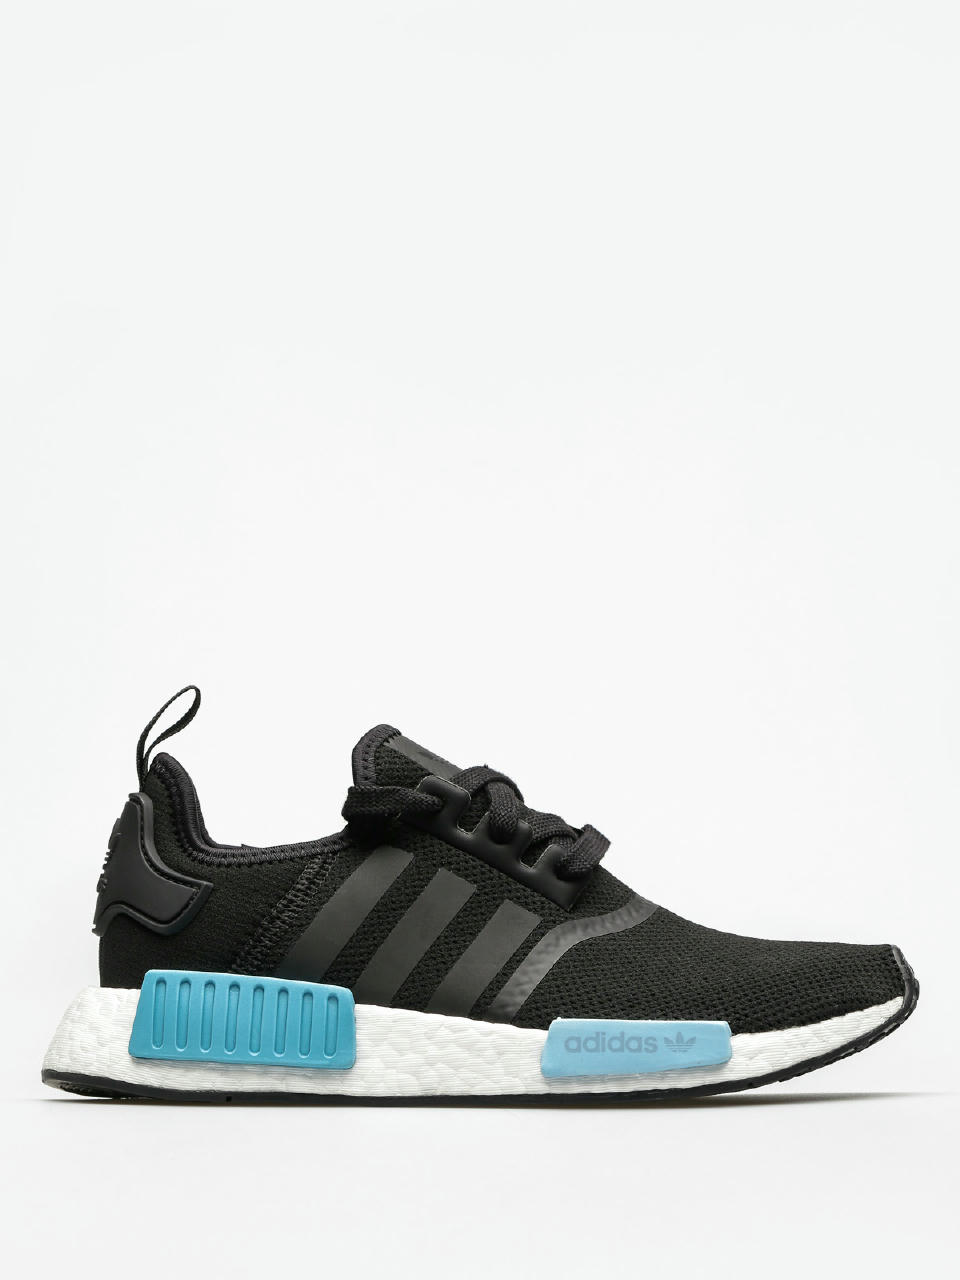 adidas Shoes Nmd Wmn (core black/core black/icey blue f17)